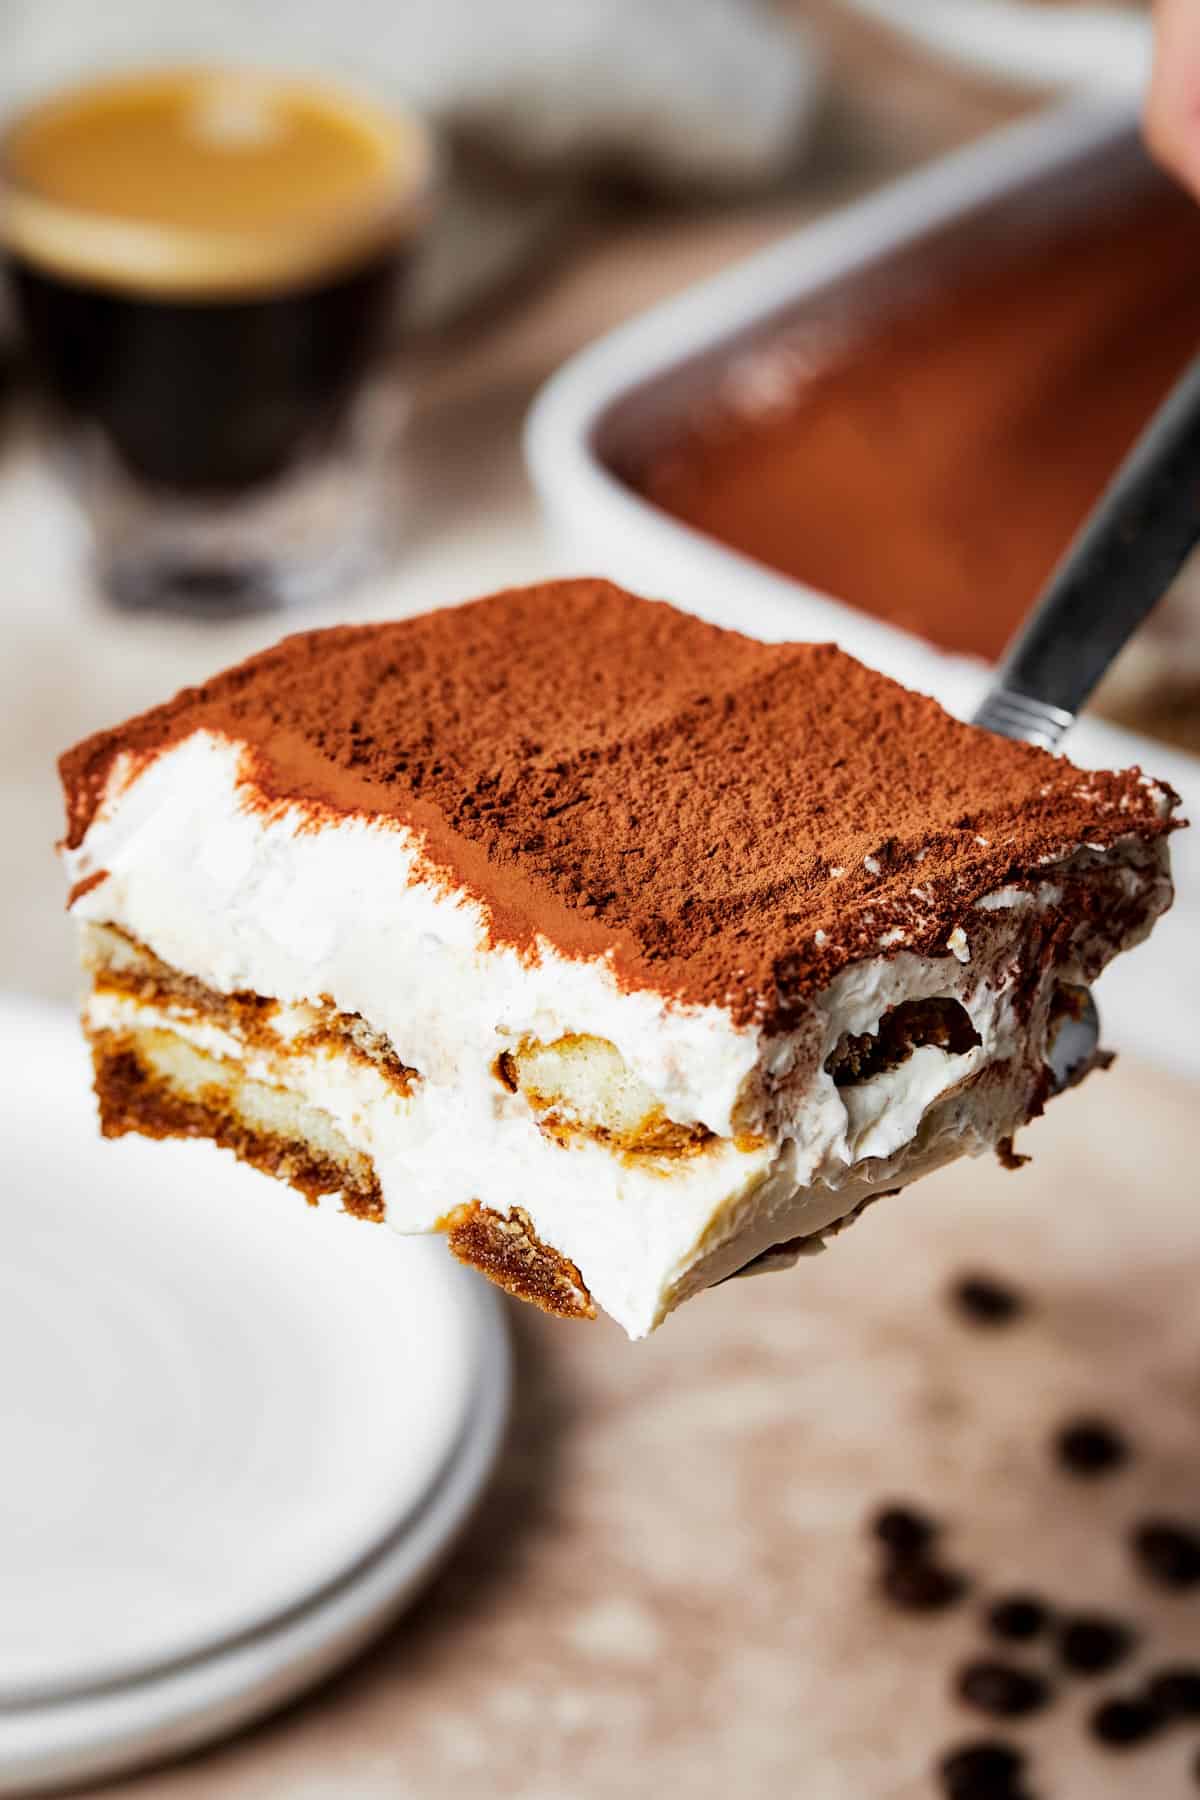 A square of tiramisu on a serving utensil being placed on a dessert plate.